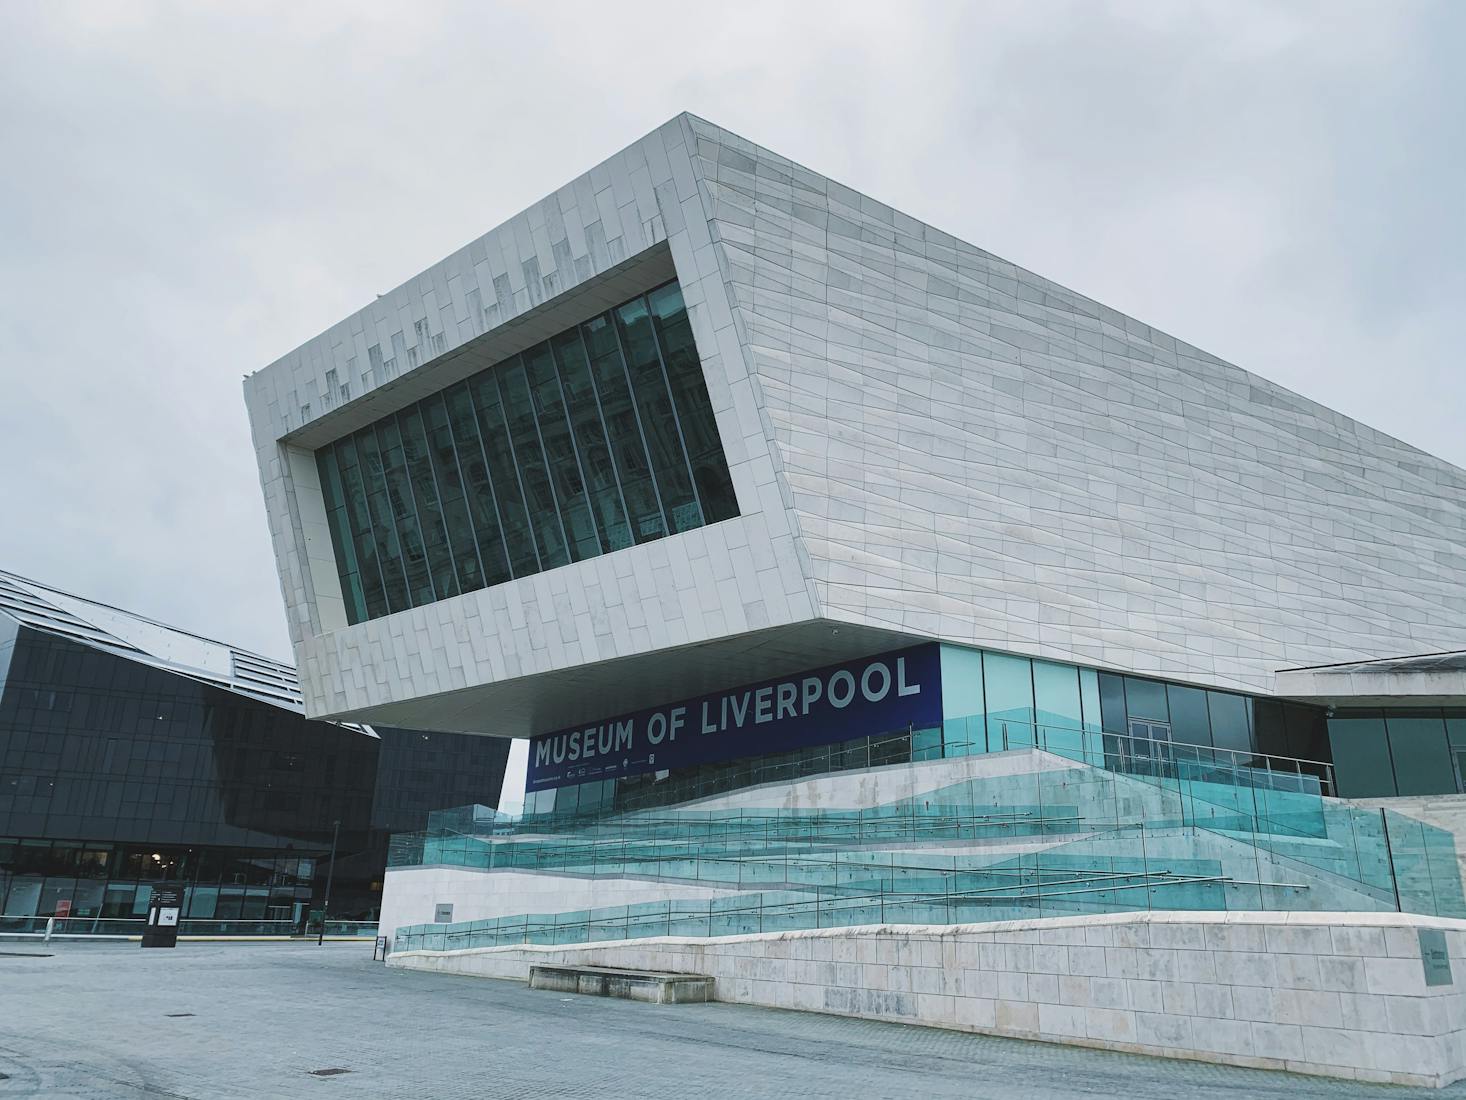 Itinerary for 3 days in Liverpool